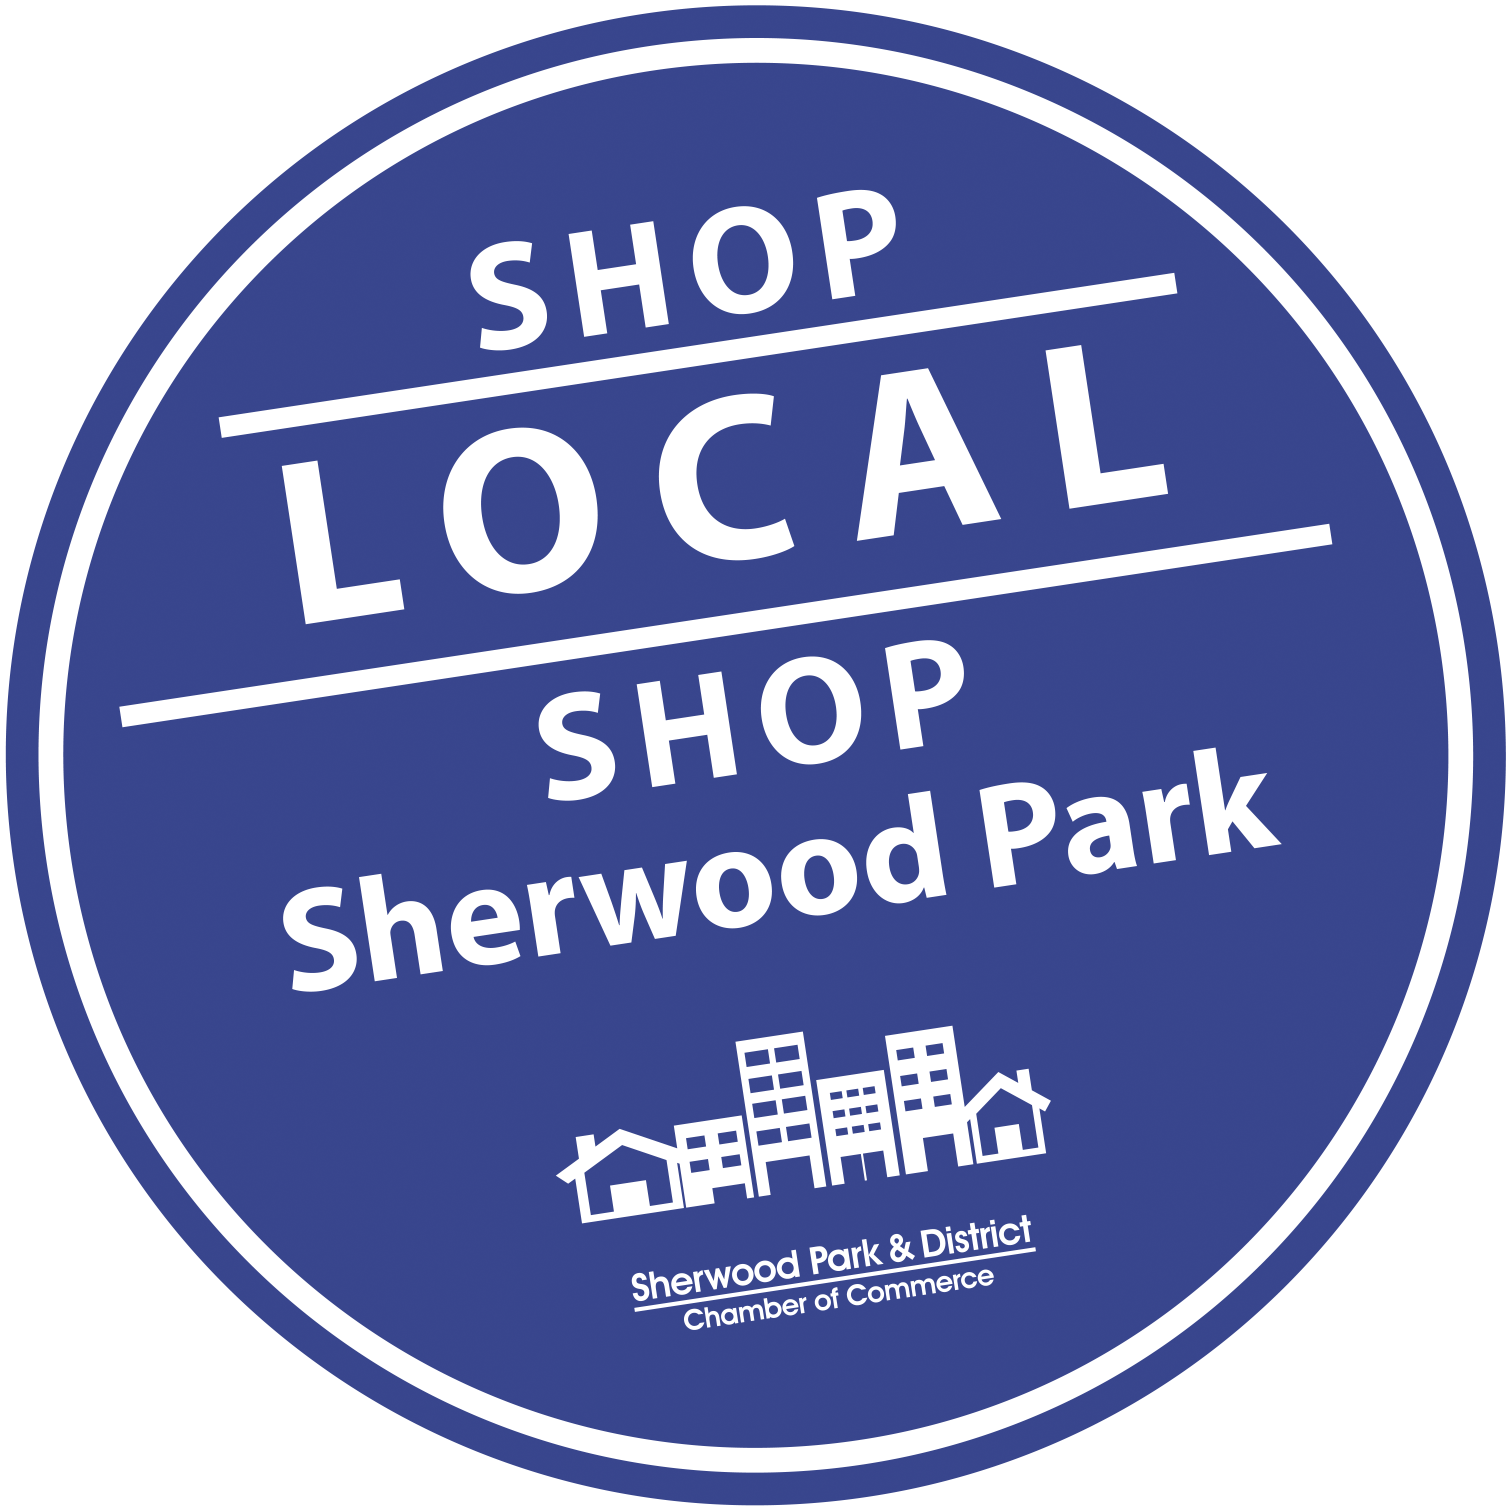 Sherwood Park & District Chamber of Commerce